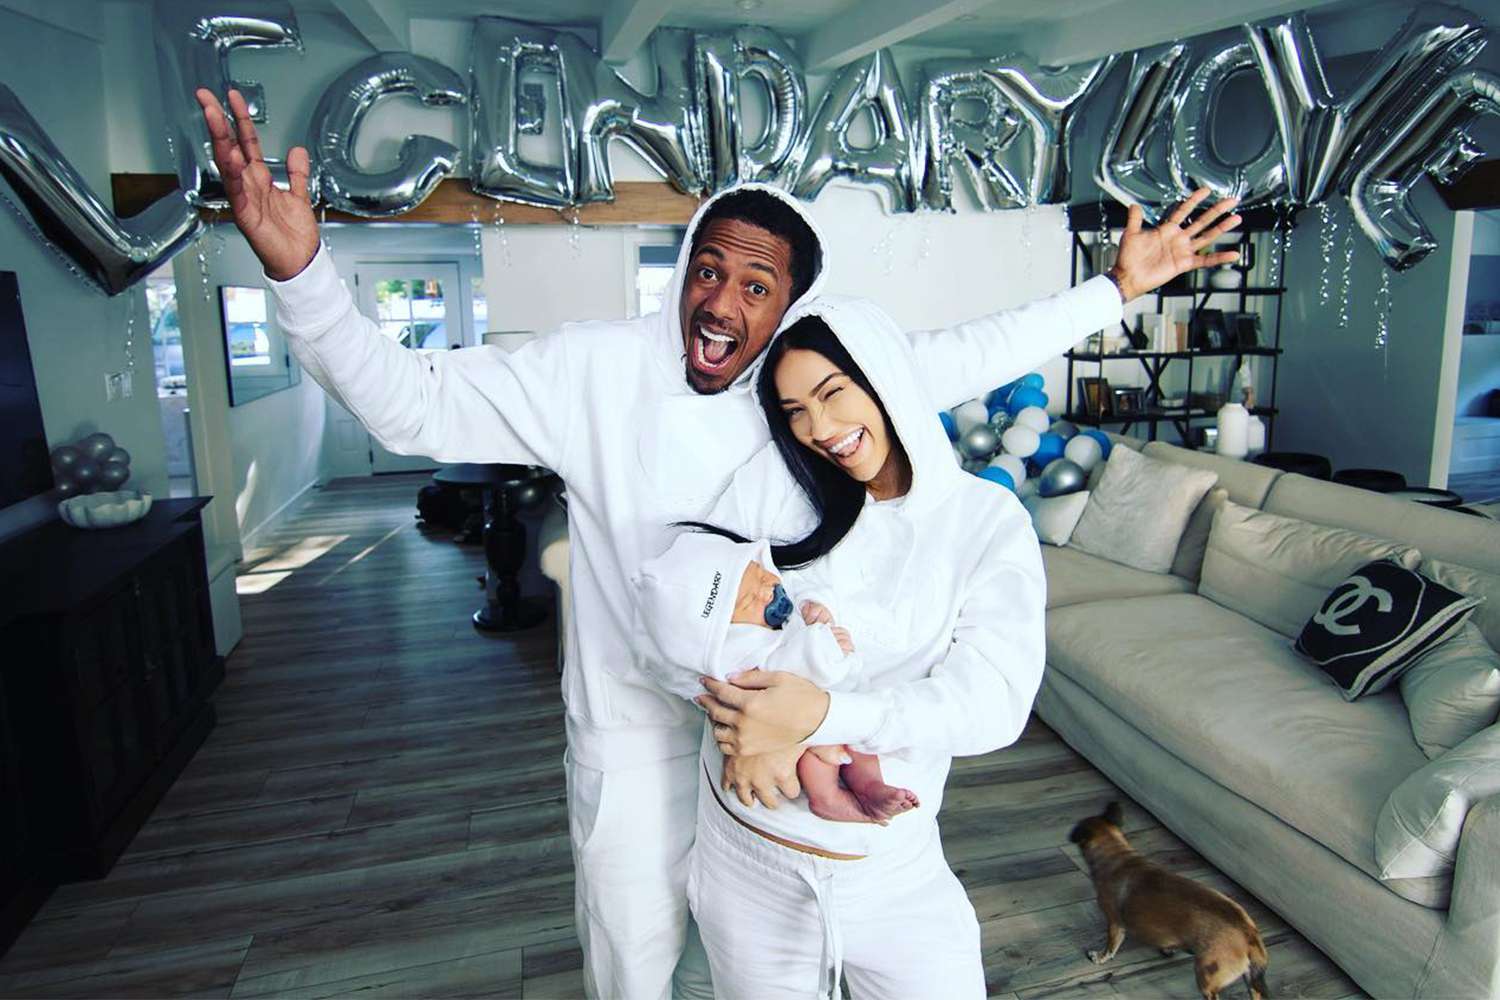 https://www.instagram.com/p/Cgf9Rt2LFx8/?hl=en nickcannon Verified LEGENDARY LOVE CANNON!!!! Y’all gonna need a wide screen for this name!!! So grateful to God The Most High Elohim YAWEH for a Healthy, Happy and Harmonious Spirit having a Human Experience!! ❤️🙏🏾 aka L.L. COOL CANNON aka L.L.C. aka YOUNG LE-LO aka BROTHER LOVE Edited · 1d